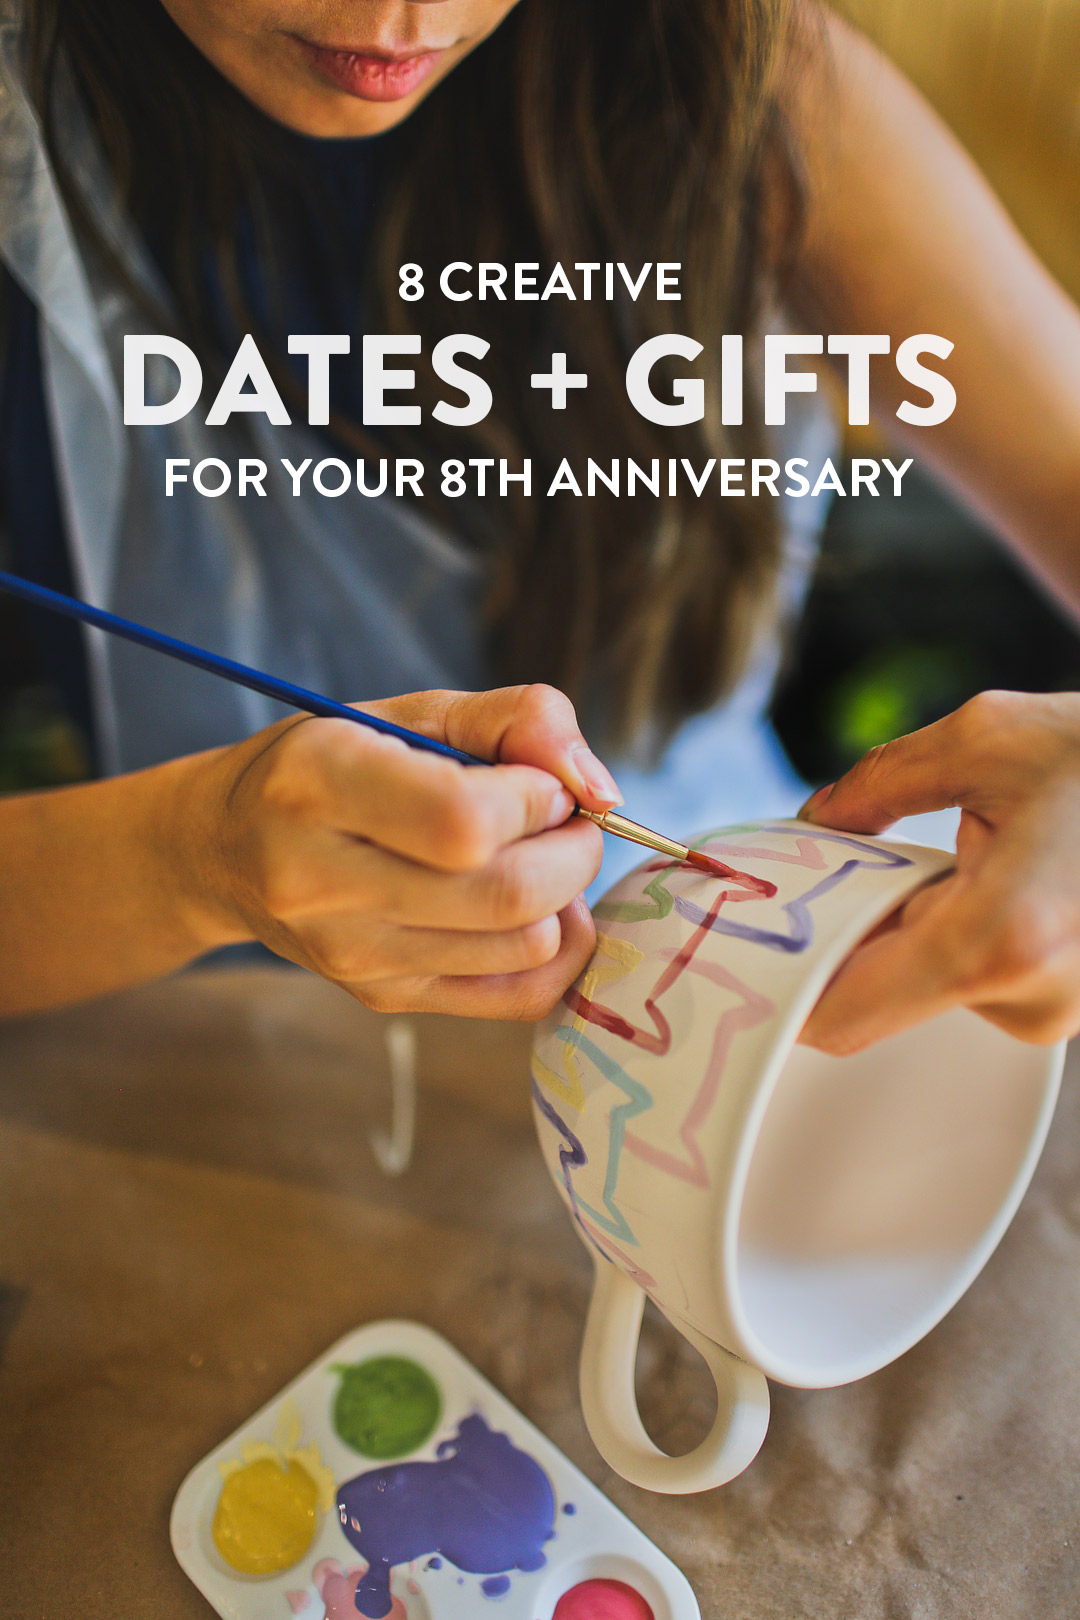 Best Wedding Anniversary Gifts & Ideas in South Africa